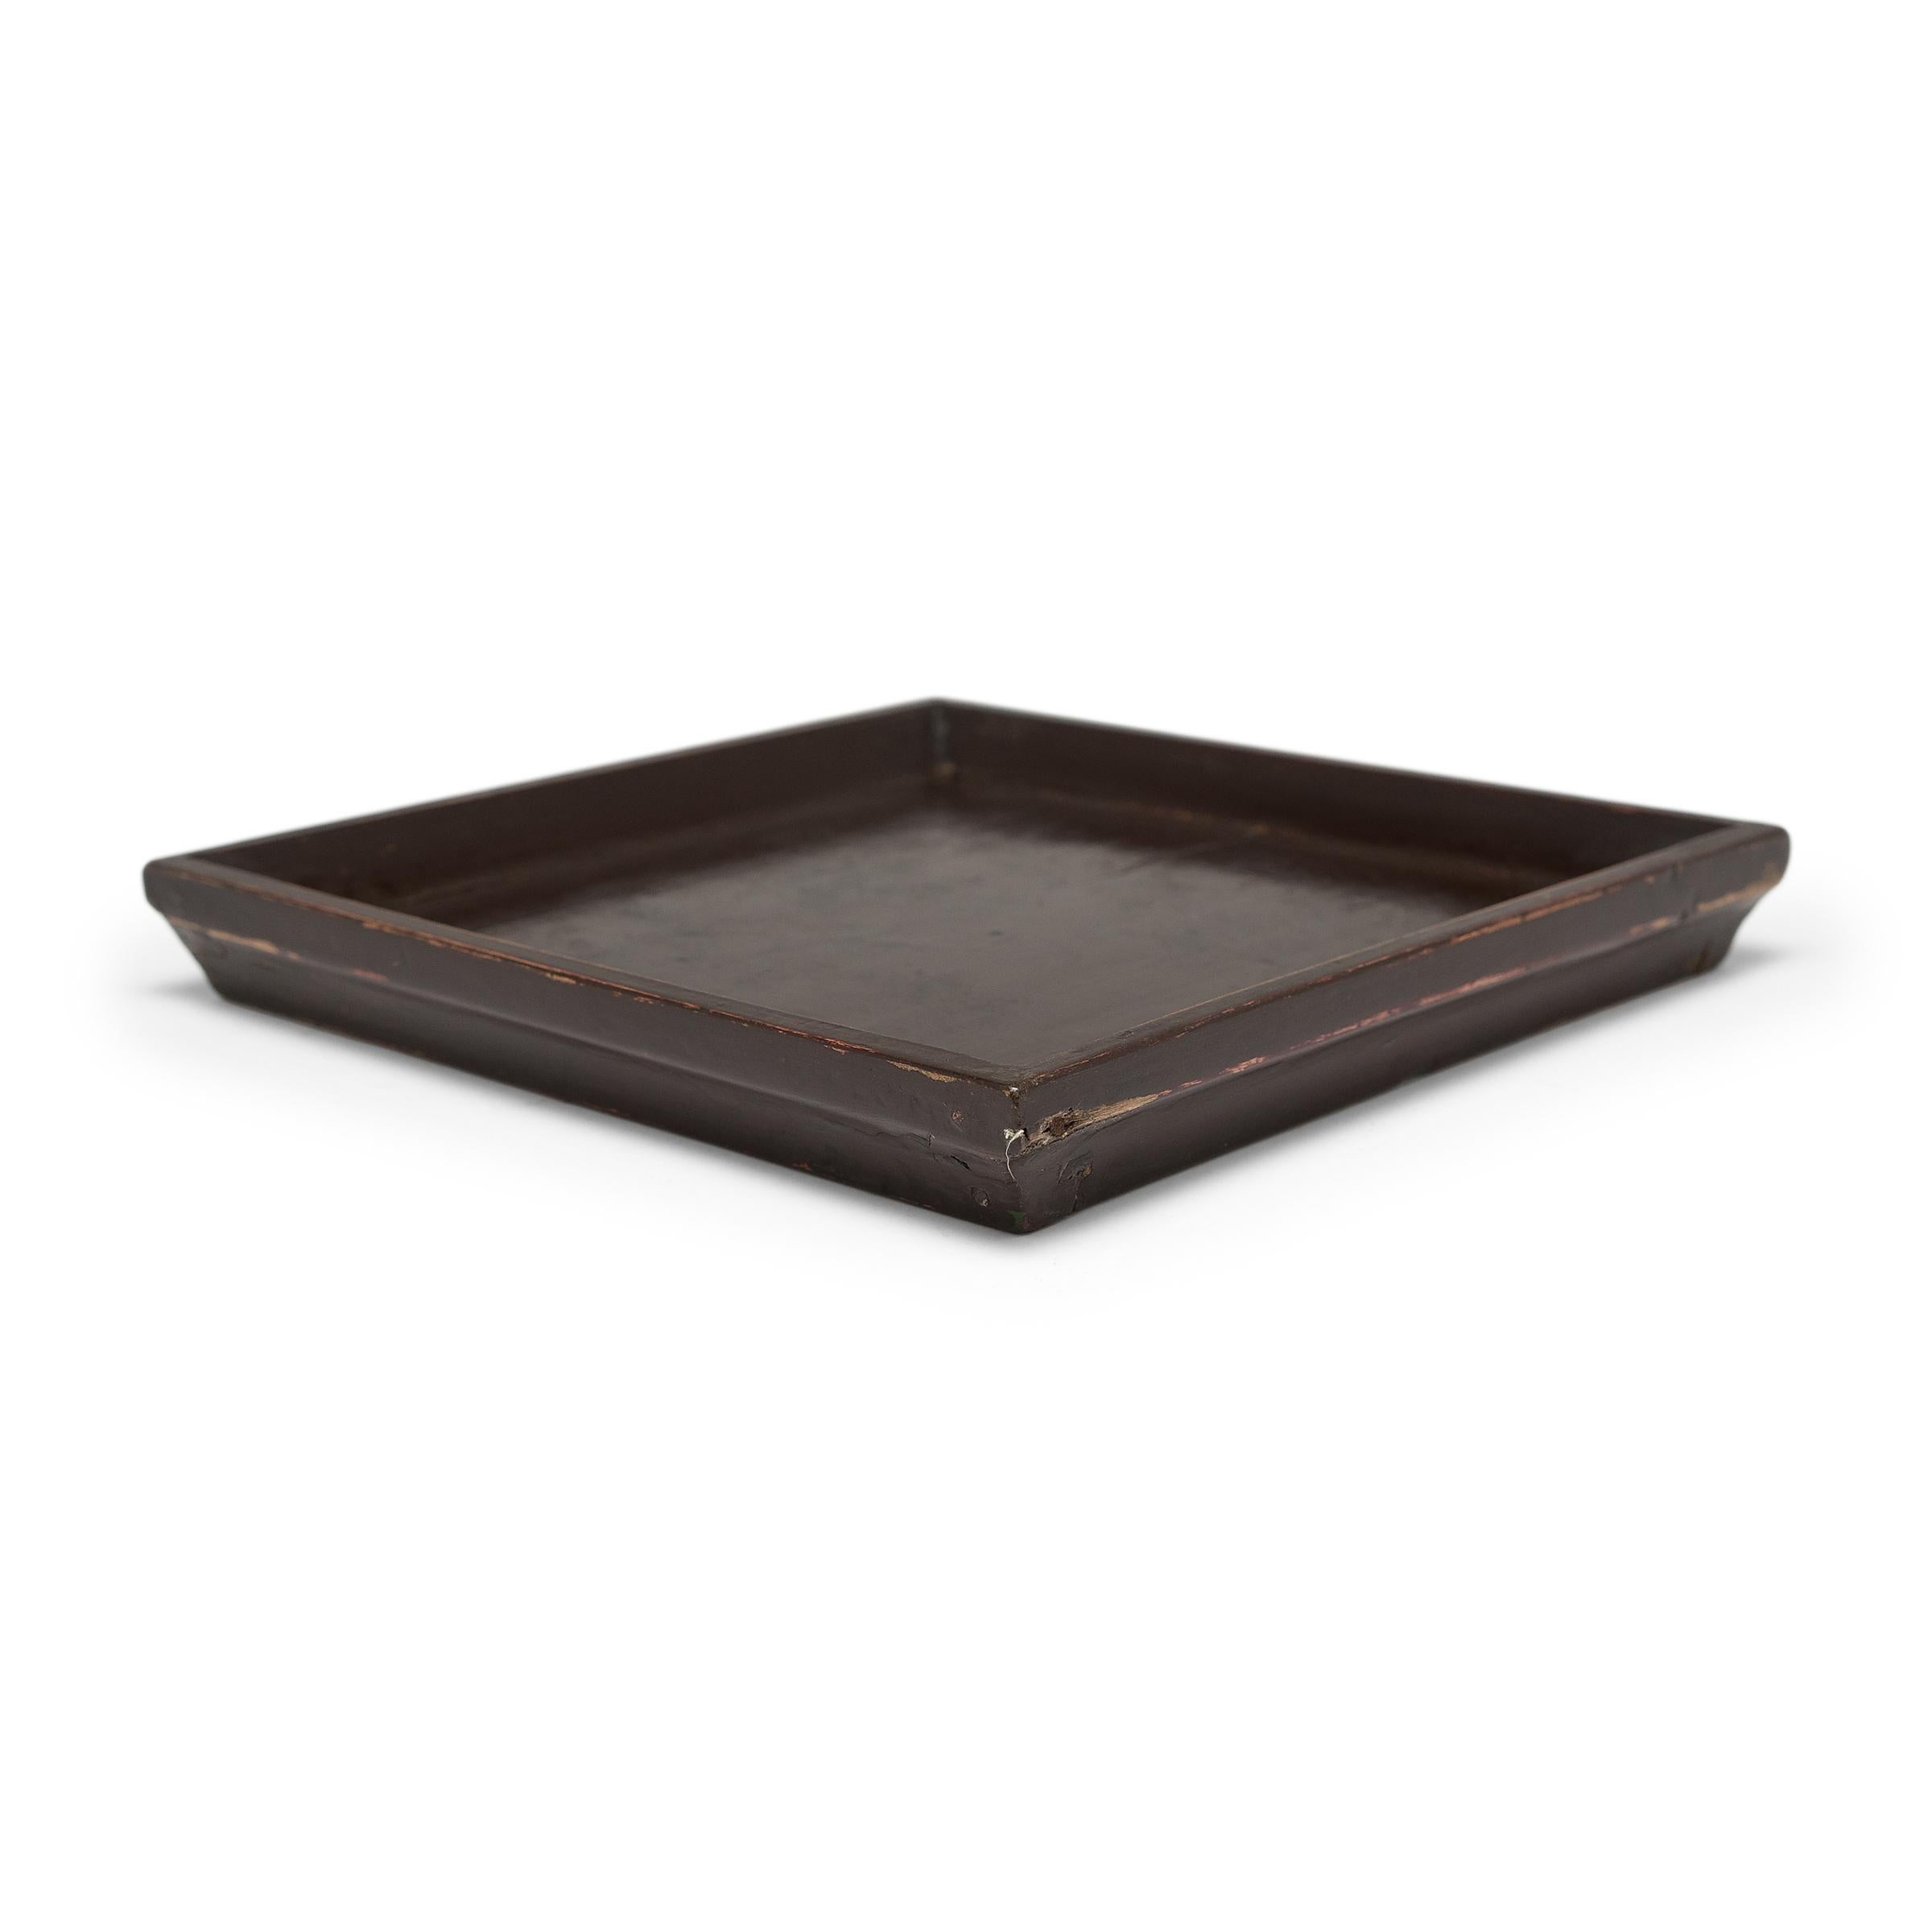 Simple lines, a modest form, and a layer of hand-brushed lacquer give this petite Qing-dynasty tray a provincial charm that recalls the warmth of home. The dark brown lacquer still holds its glossy finish with some weathering with that reveals the